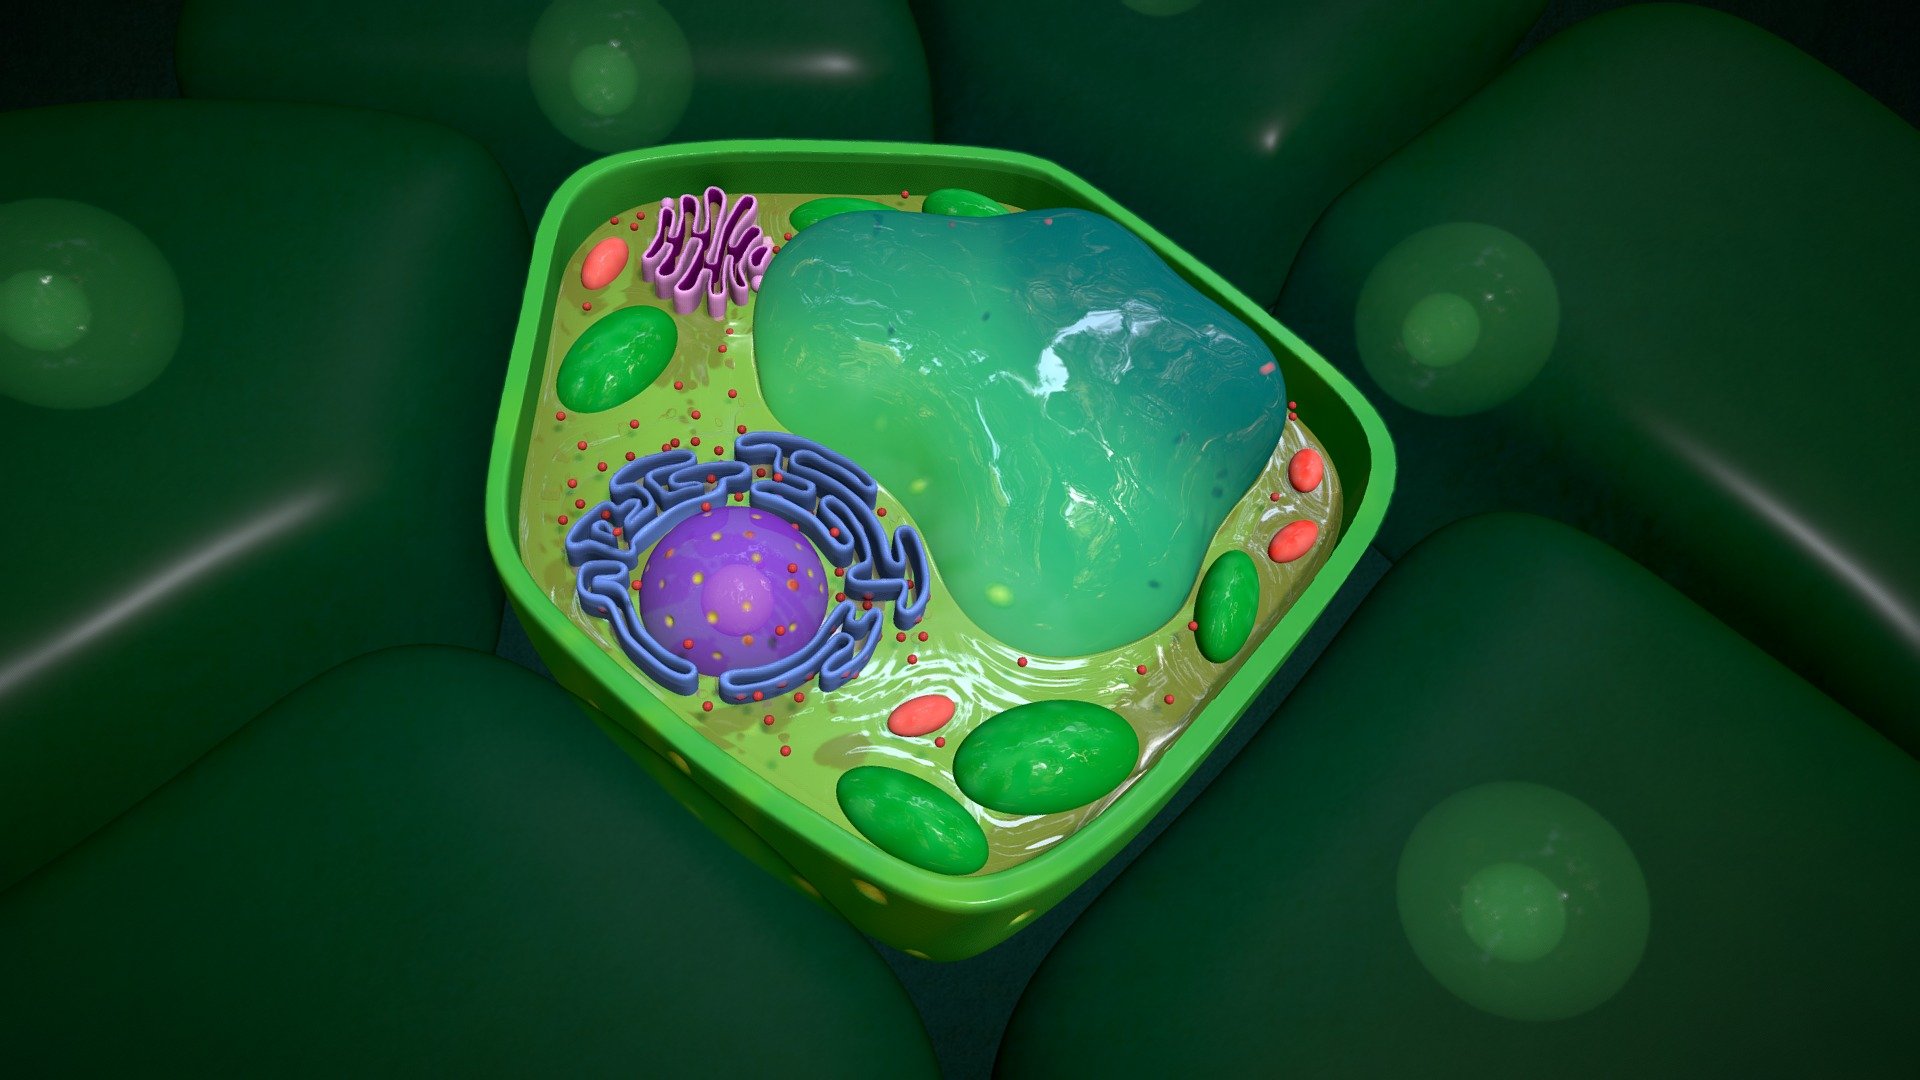 Due to the vast diversity among plant cells—size, shape, function, etc.—no two cells are the same. However, this 3D visualization of a plant cell interior demonstrates some of the main organelles that can be found within a plant cell, namely the cell wall, vacuole, nucleus and nucleolus, ribosomes, rough endoplasmic reticulum (RER), Golgi apparatus, mitochondria, and chloroplasts. The organelles are suspended within a gelatinous fluid called the cytoplasm. The presence of chloroplasts within this model indicates that this particular plant cell would be found within a green part of the plant. 

Click here to explore companion models within the Journey Inside a Daffodil collection.

Sculpted in ZBrush 3d model